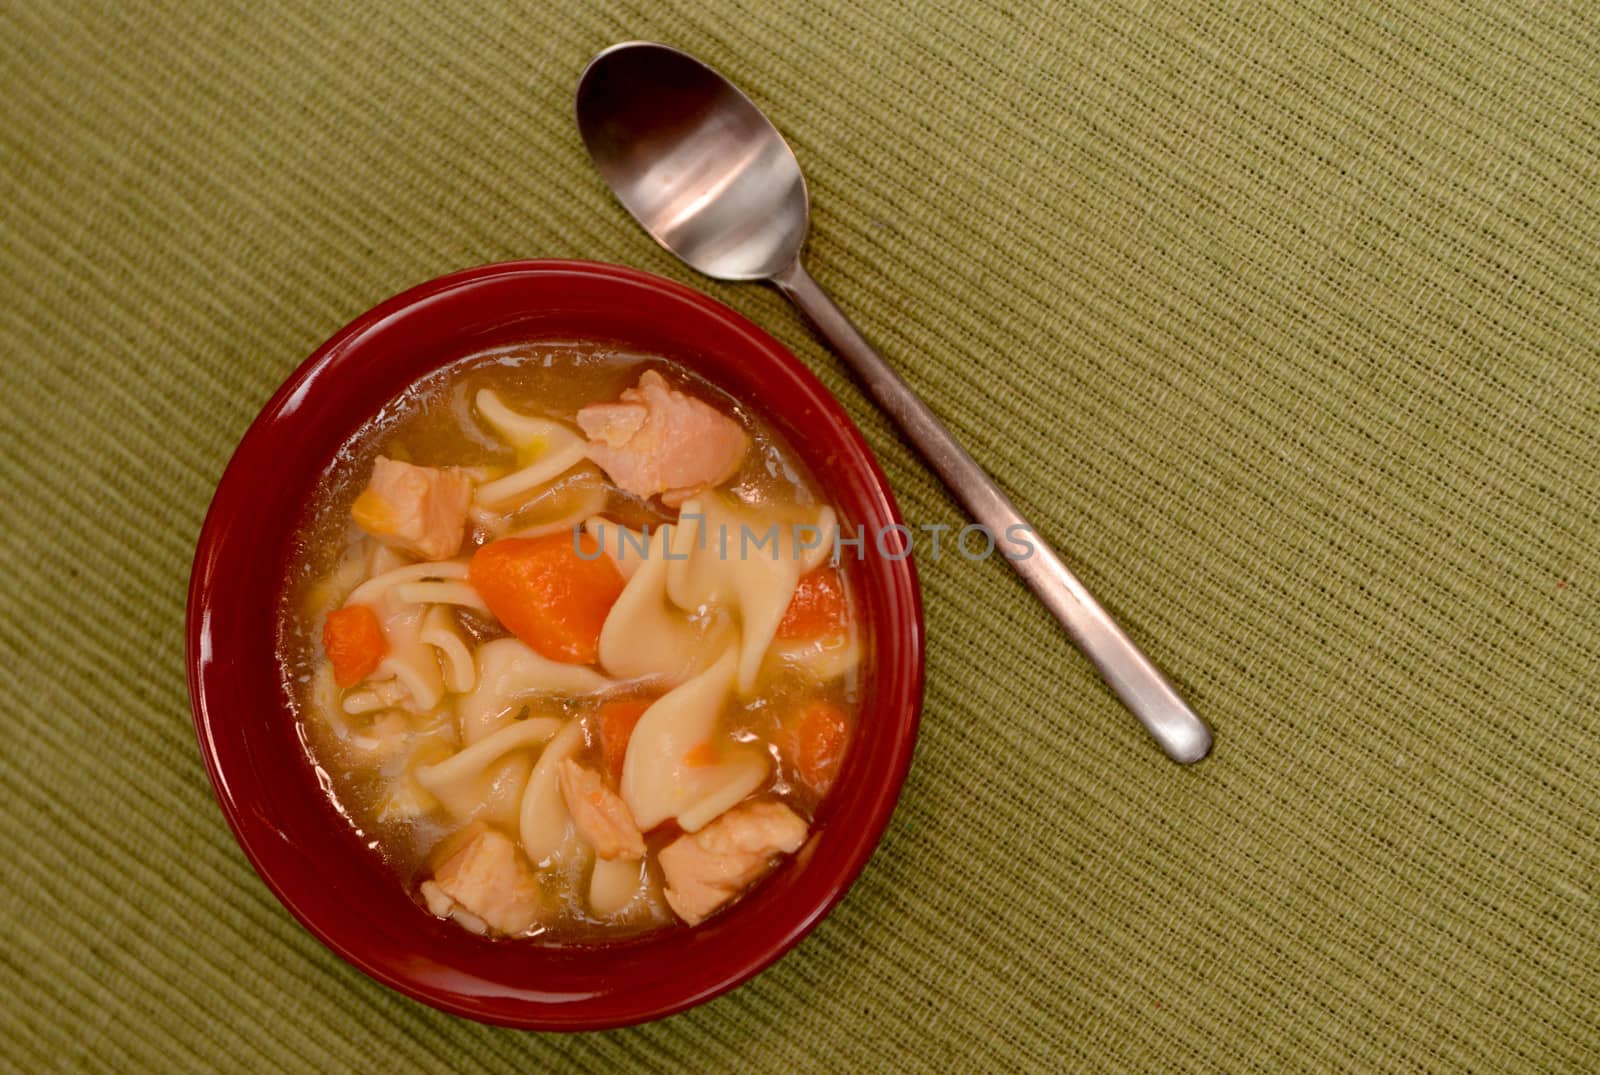 chicken noodle soup in red bowl by ftlaudgirl